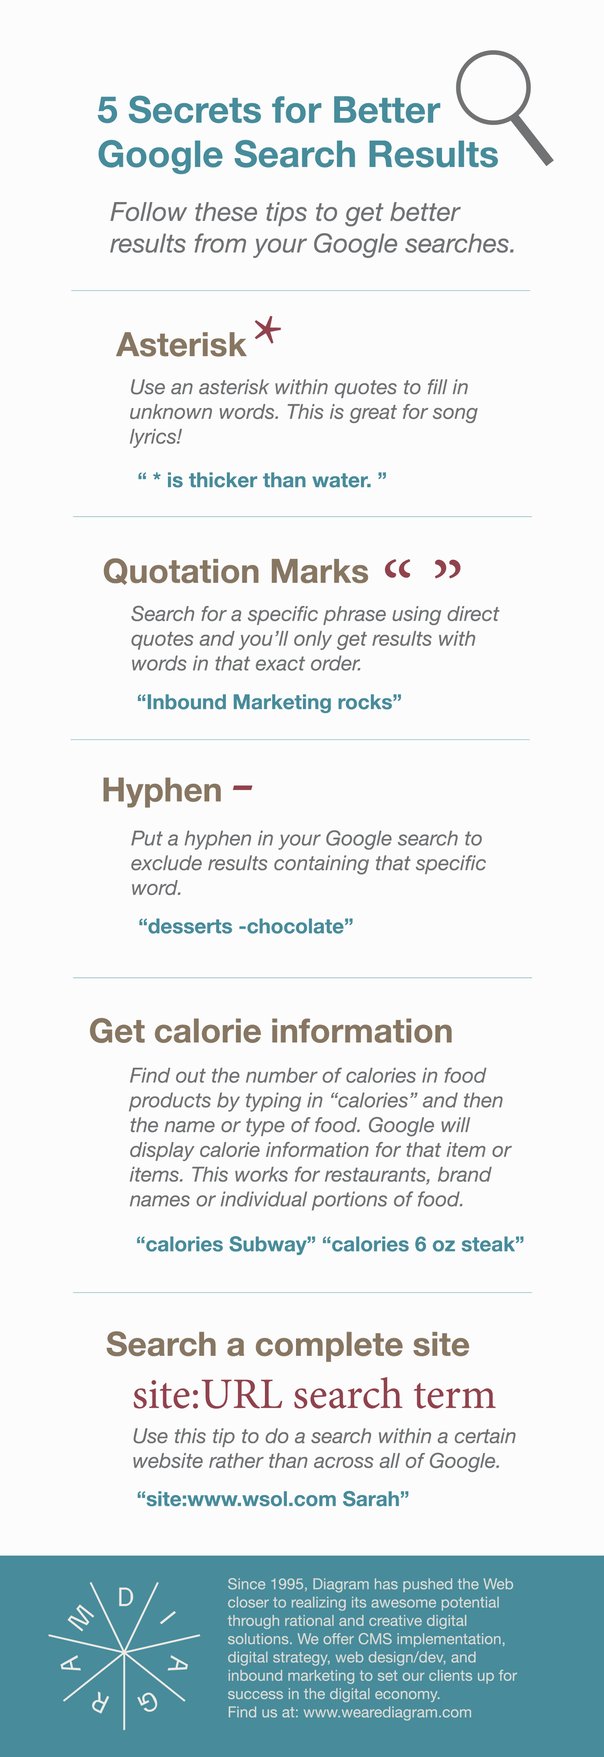 Tips for Getting Better Google Searches